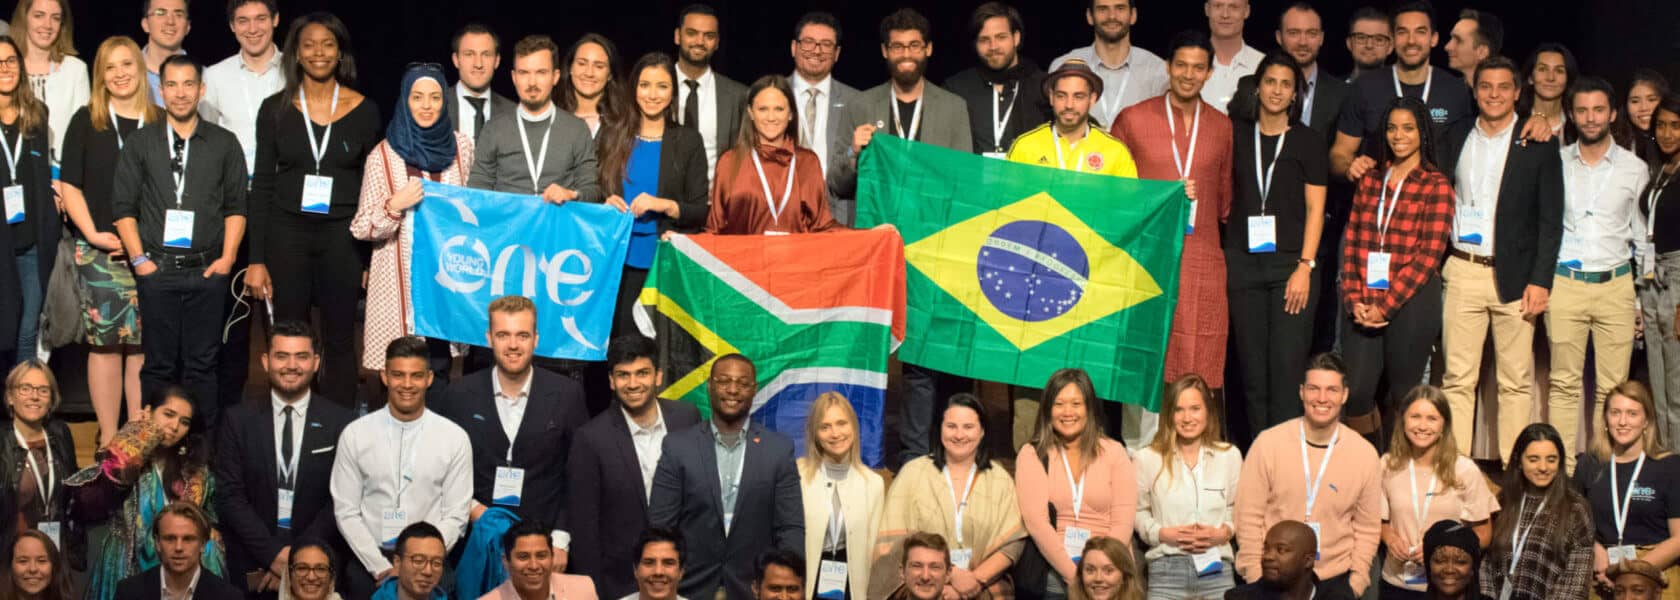 Solidaritat Scholarship For the One Young World Summit